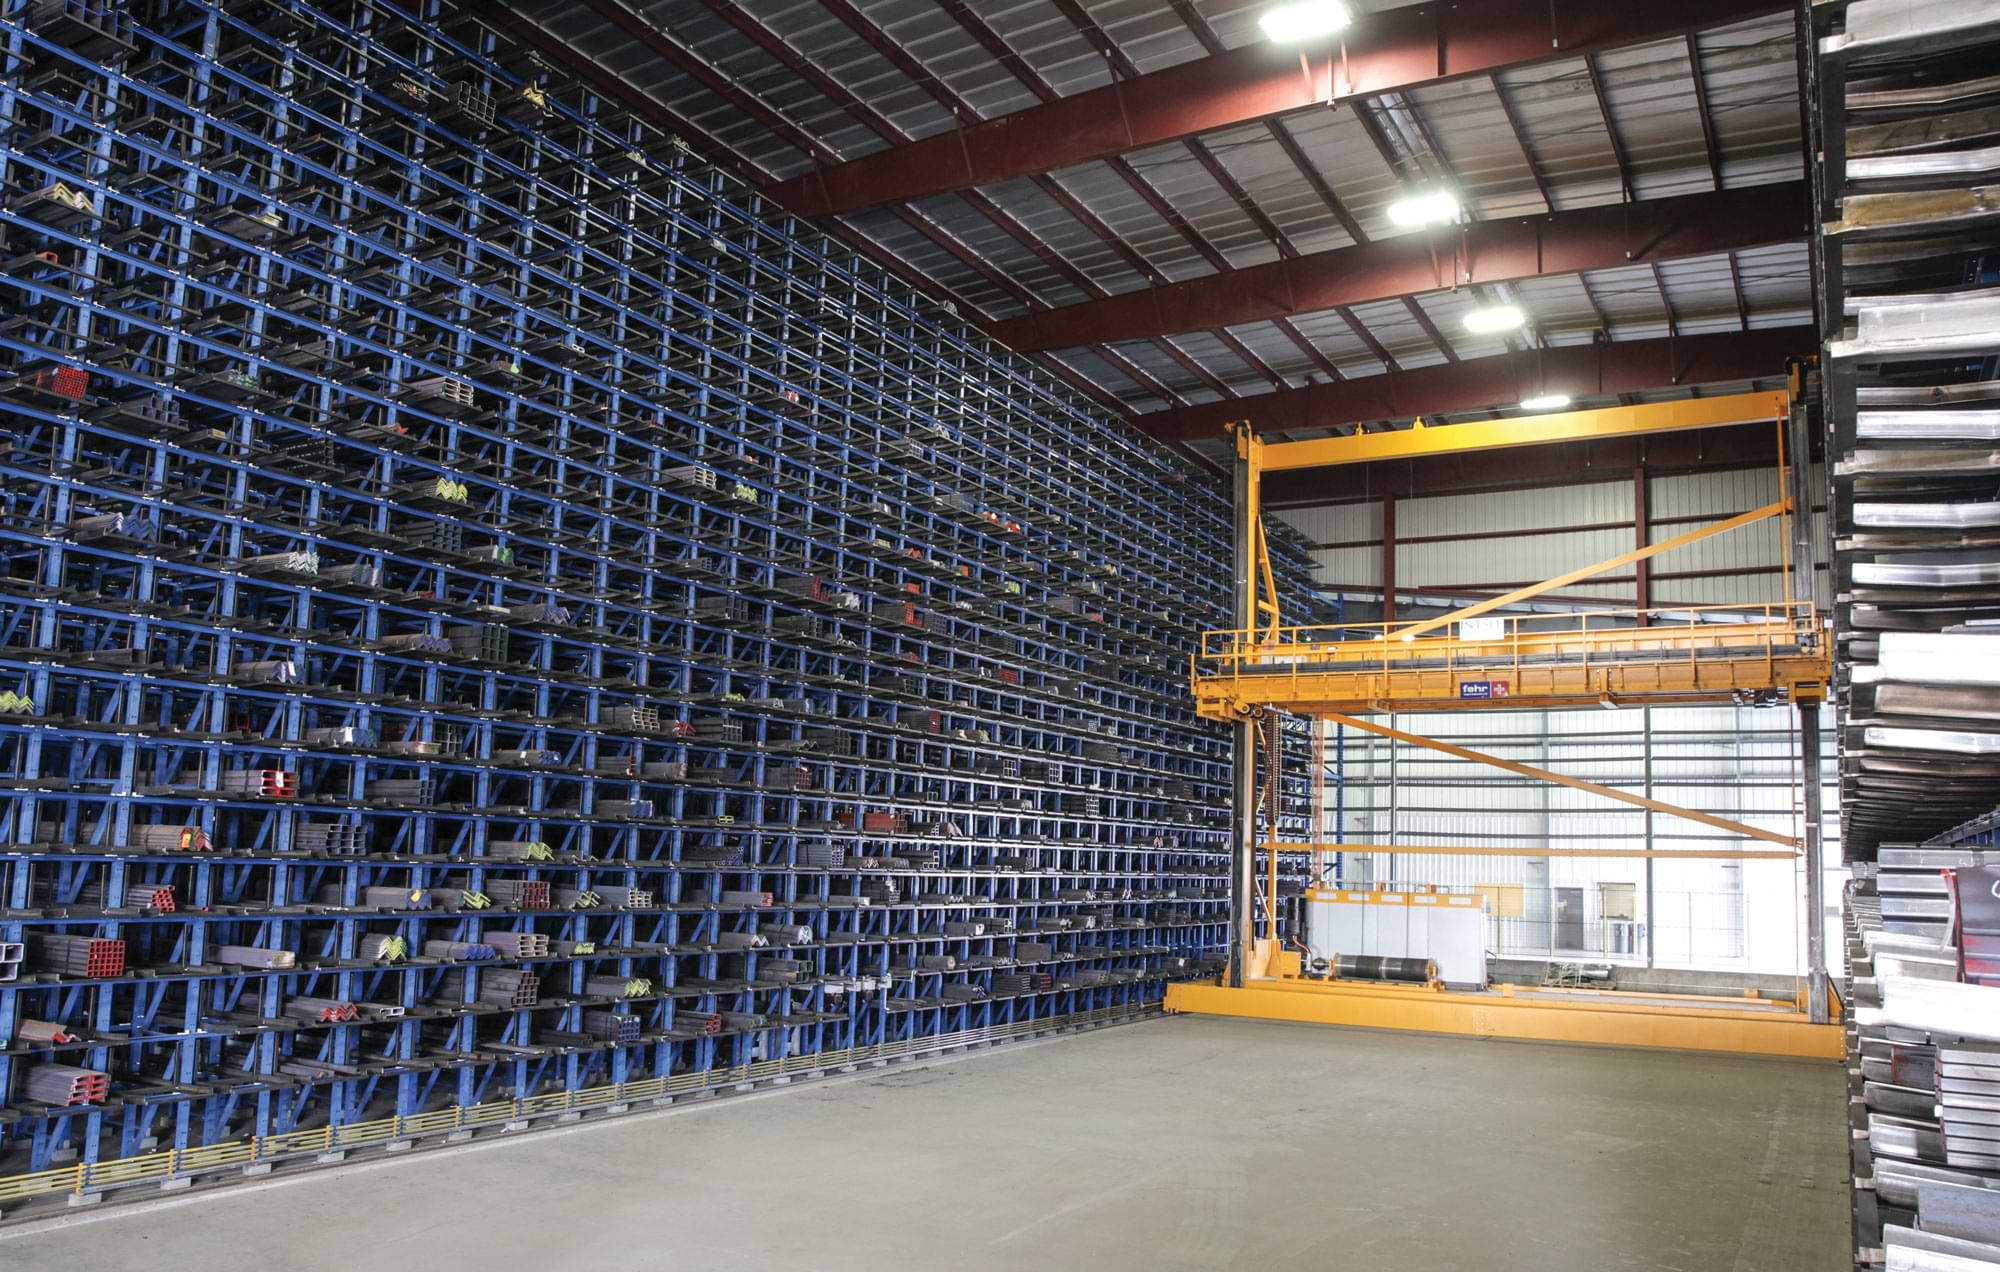 Aisle view of the stacker crane for the Fehr honeycomb system